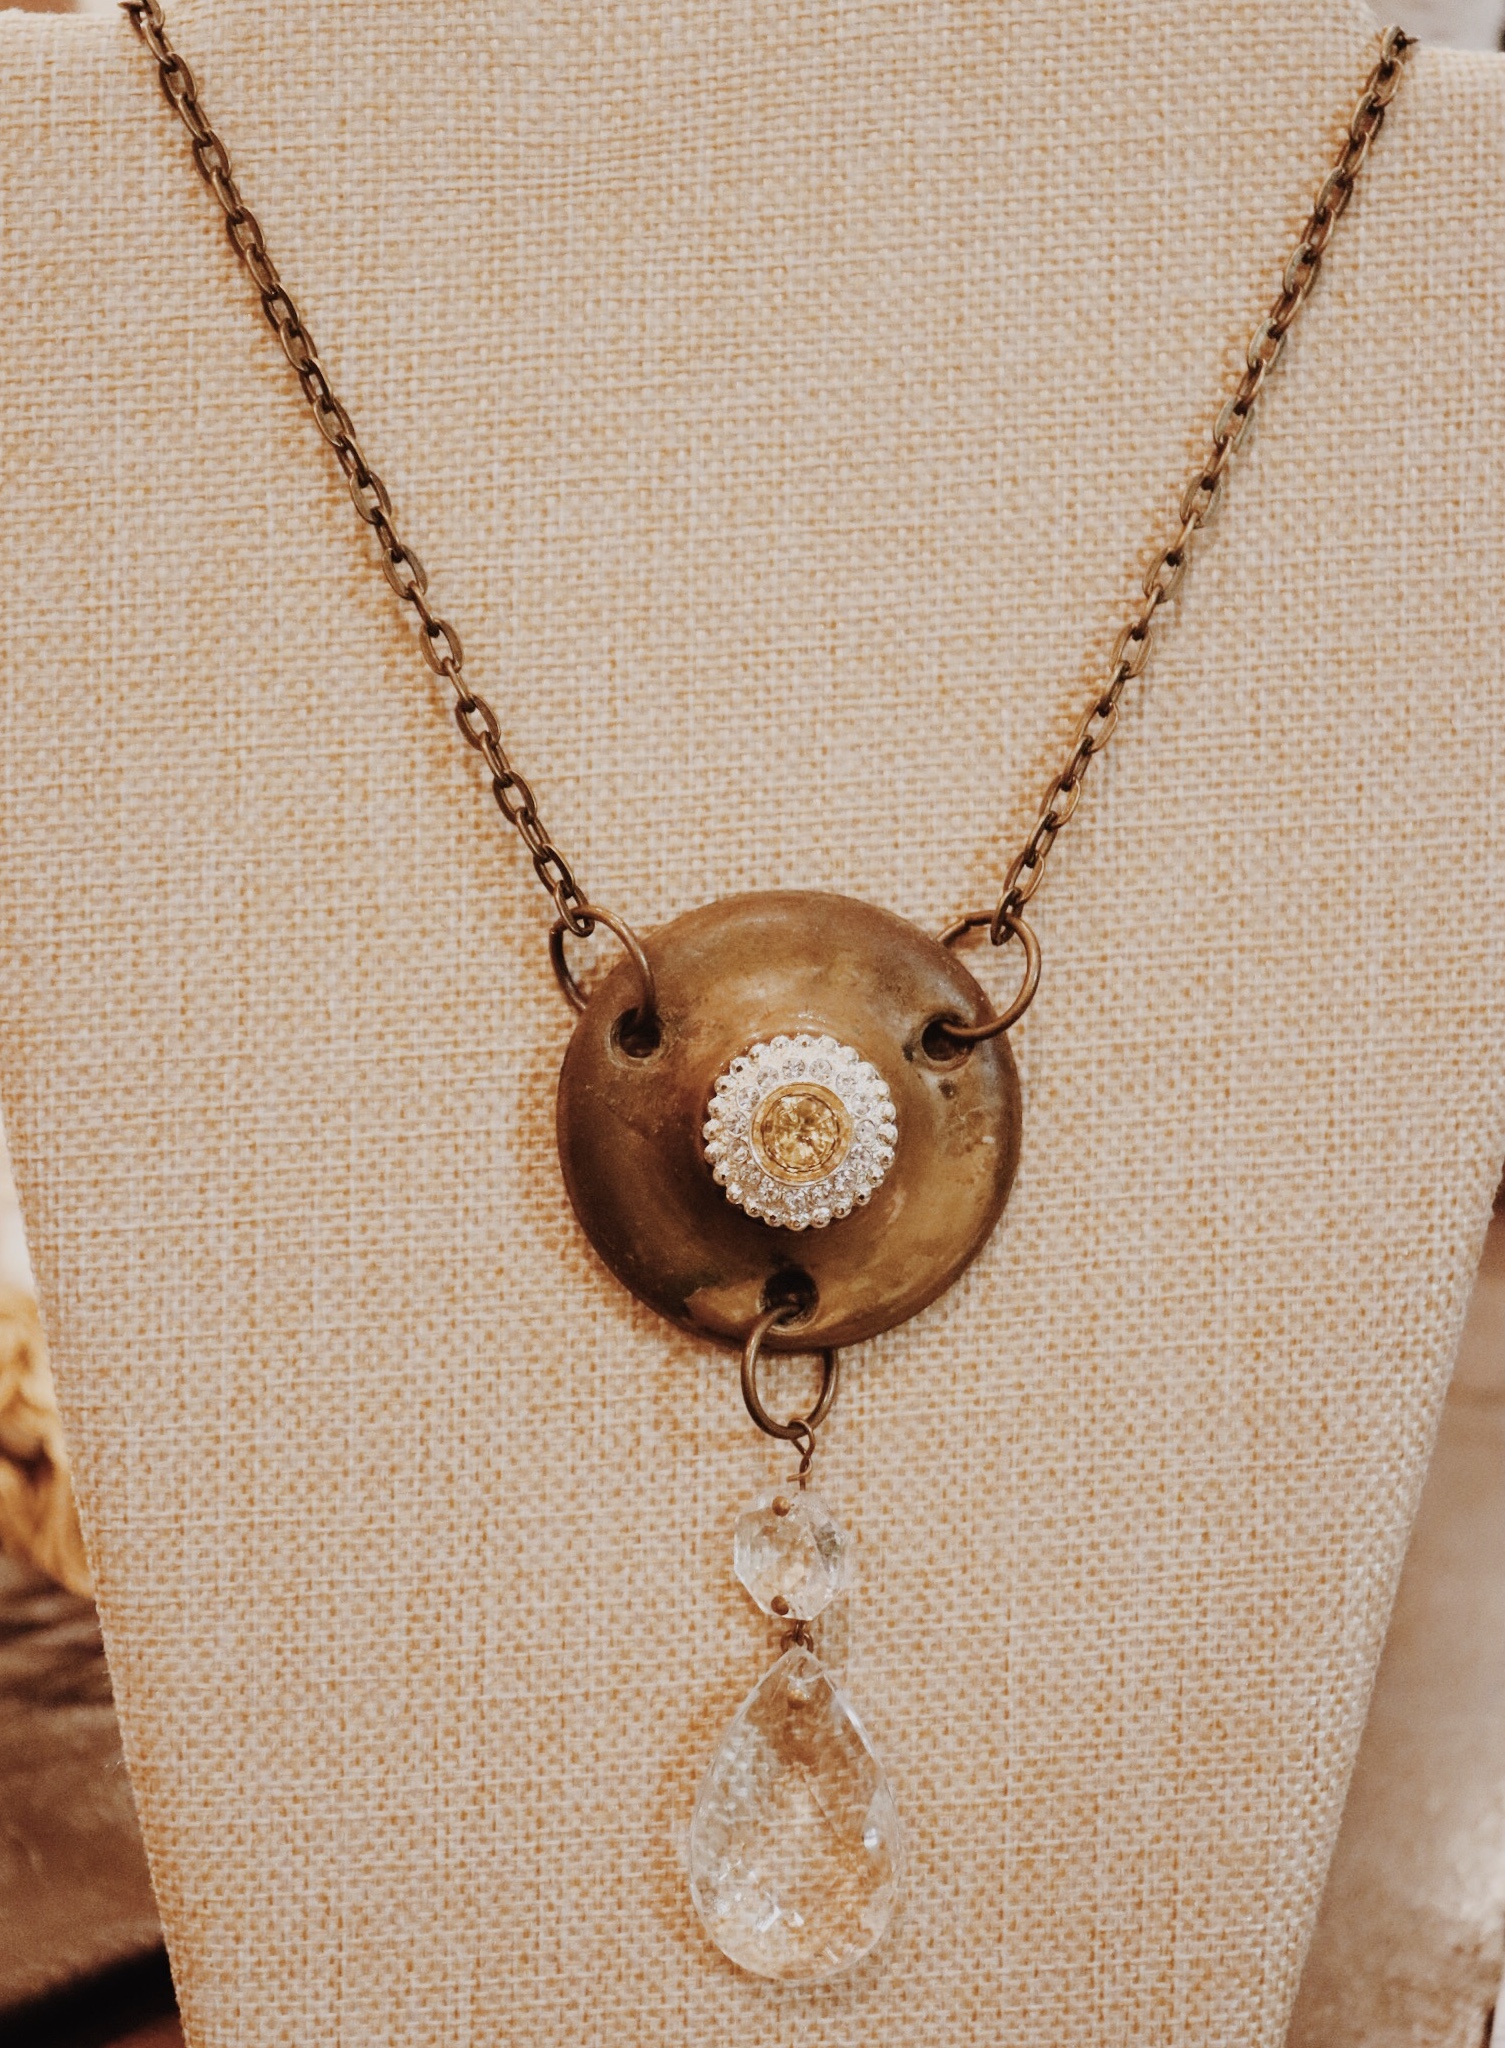 This handmade necklace hangs on a 30 inch chain!